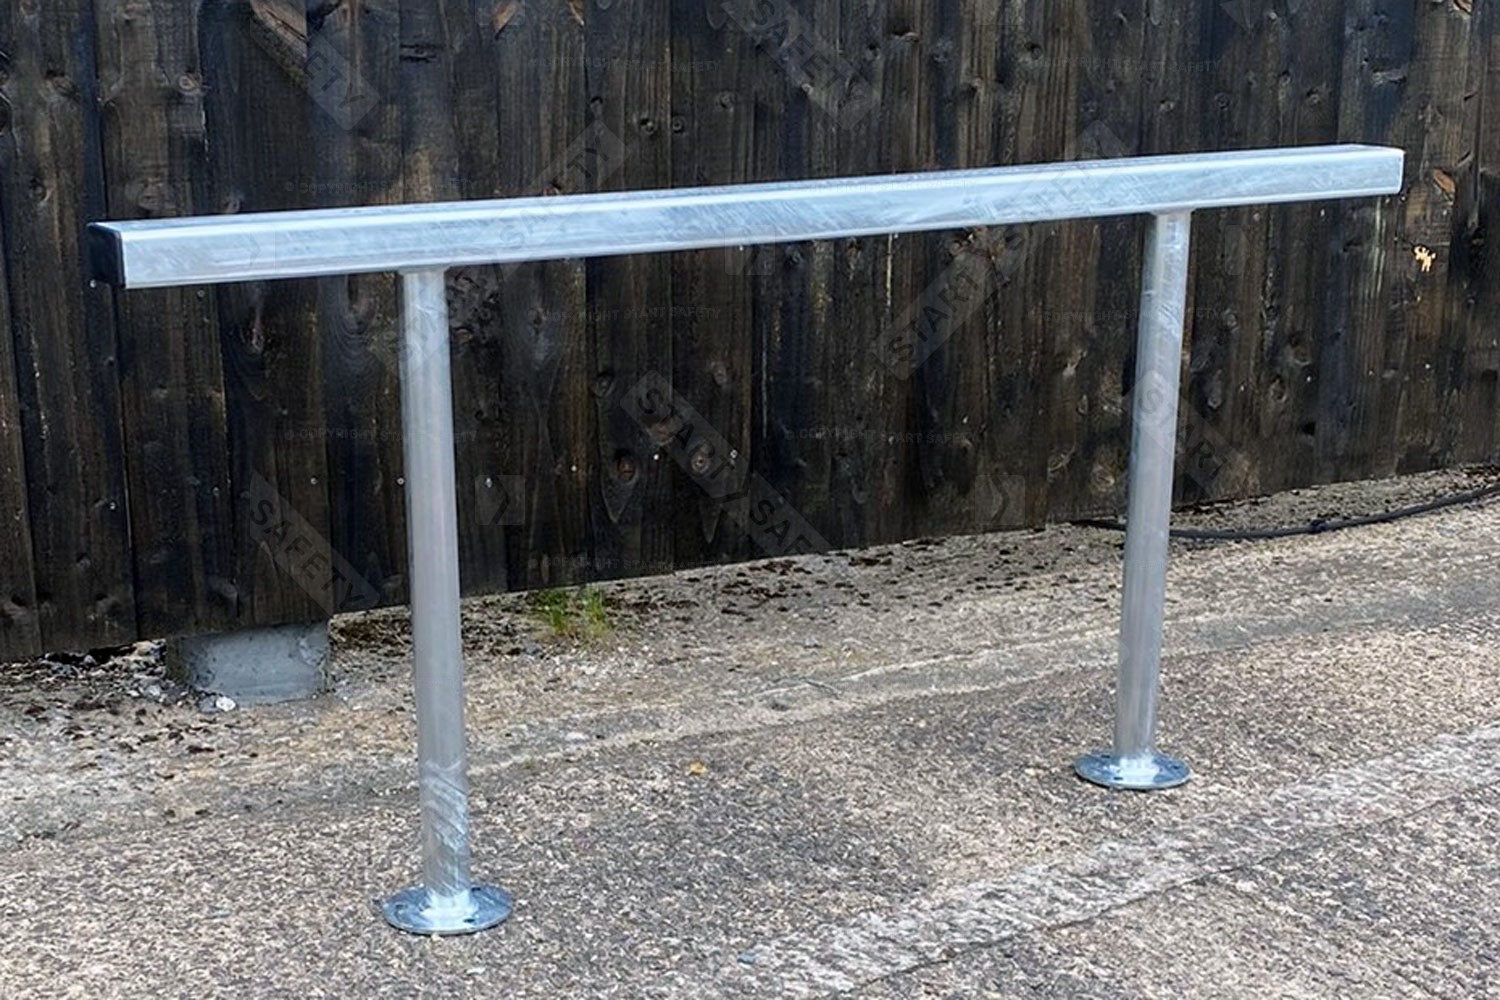 Autopa bench seat for smoking shelters